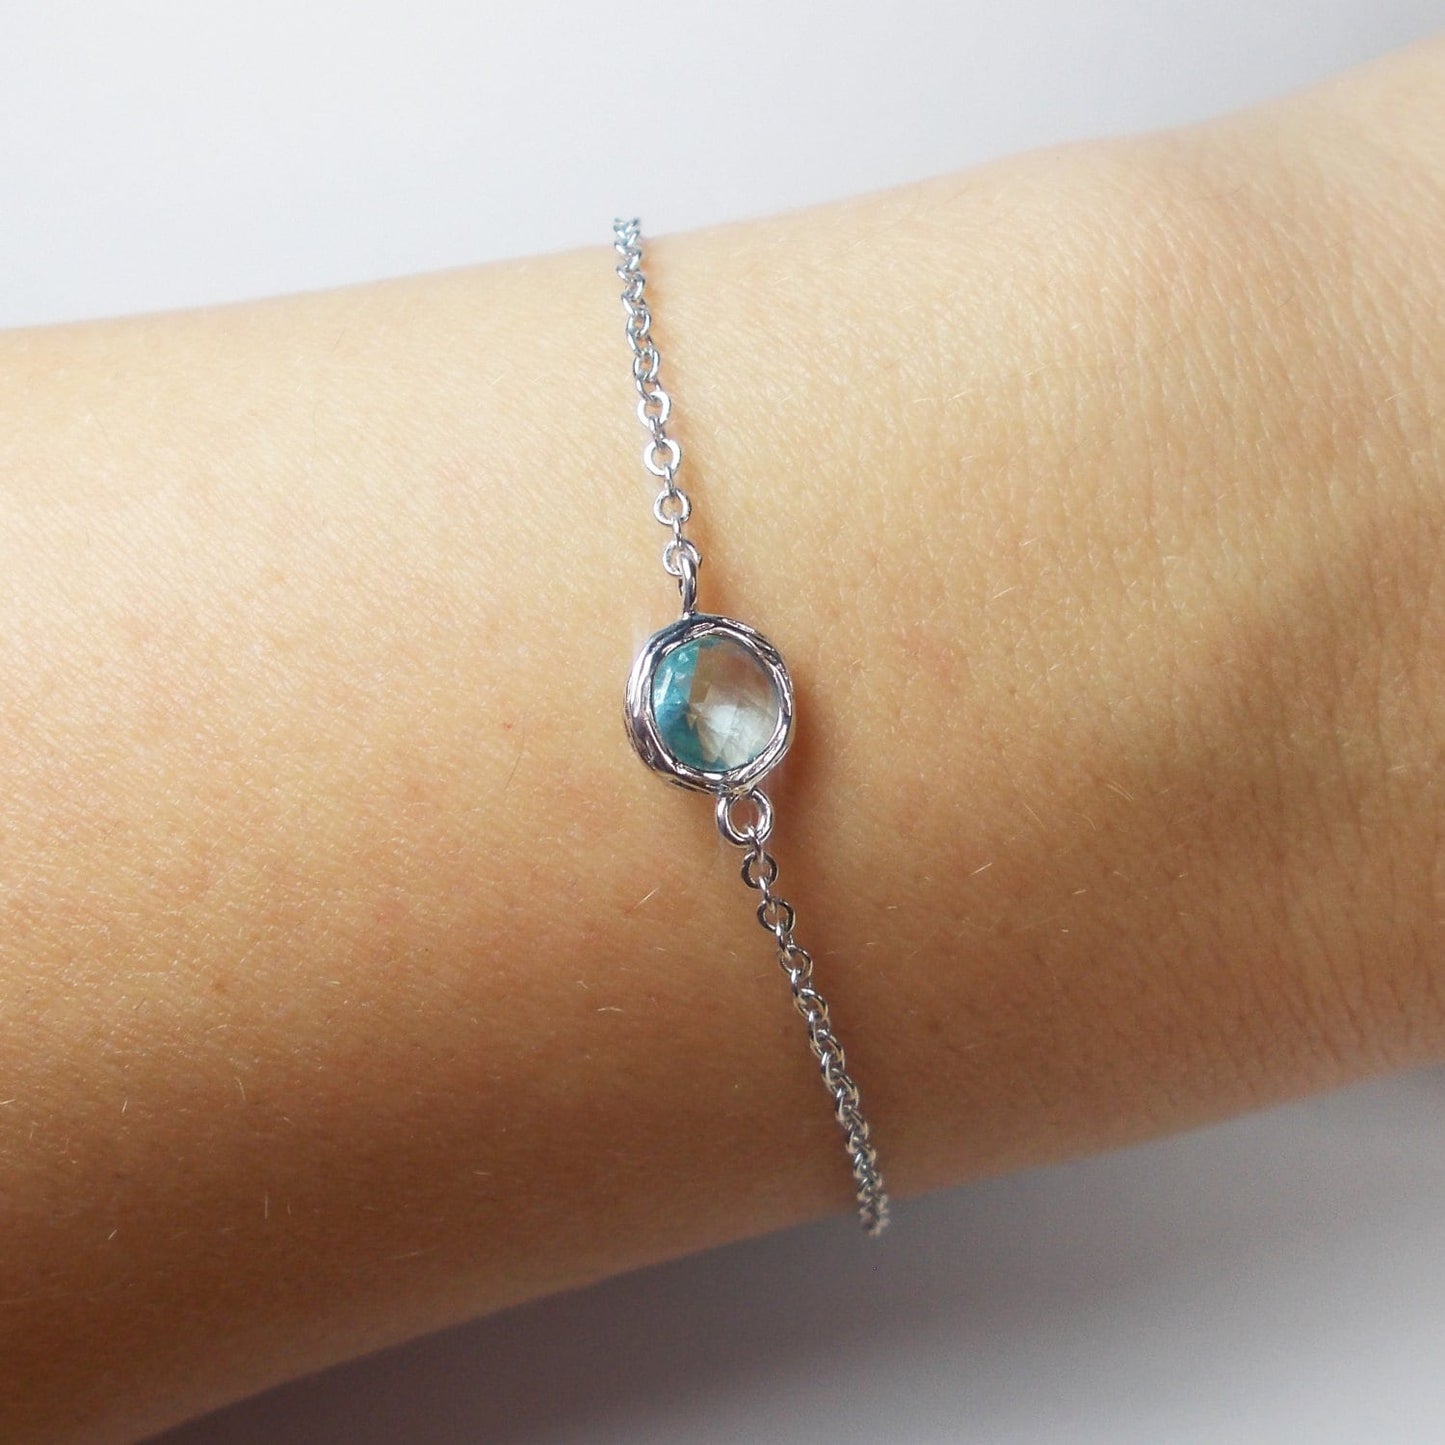 Mini Pop of Color Silver and Aquamarine Glass Connector Stacking Bracelet - BridesMaid Gift - GemStone Bracelet - March Birthstone